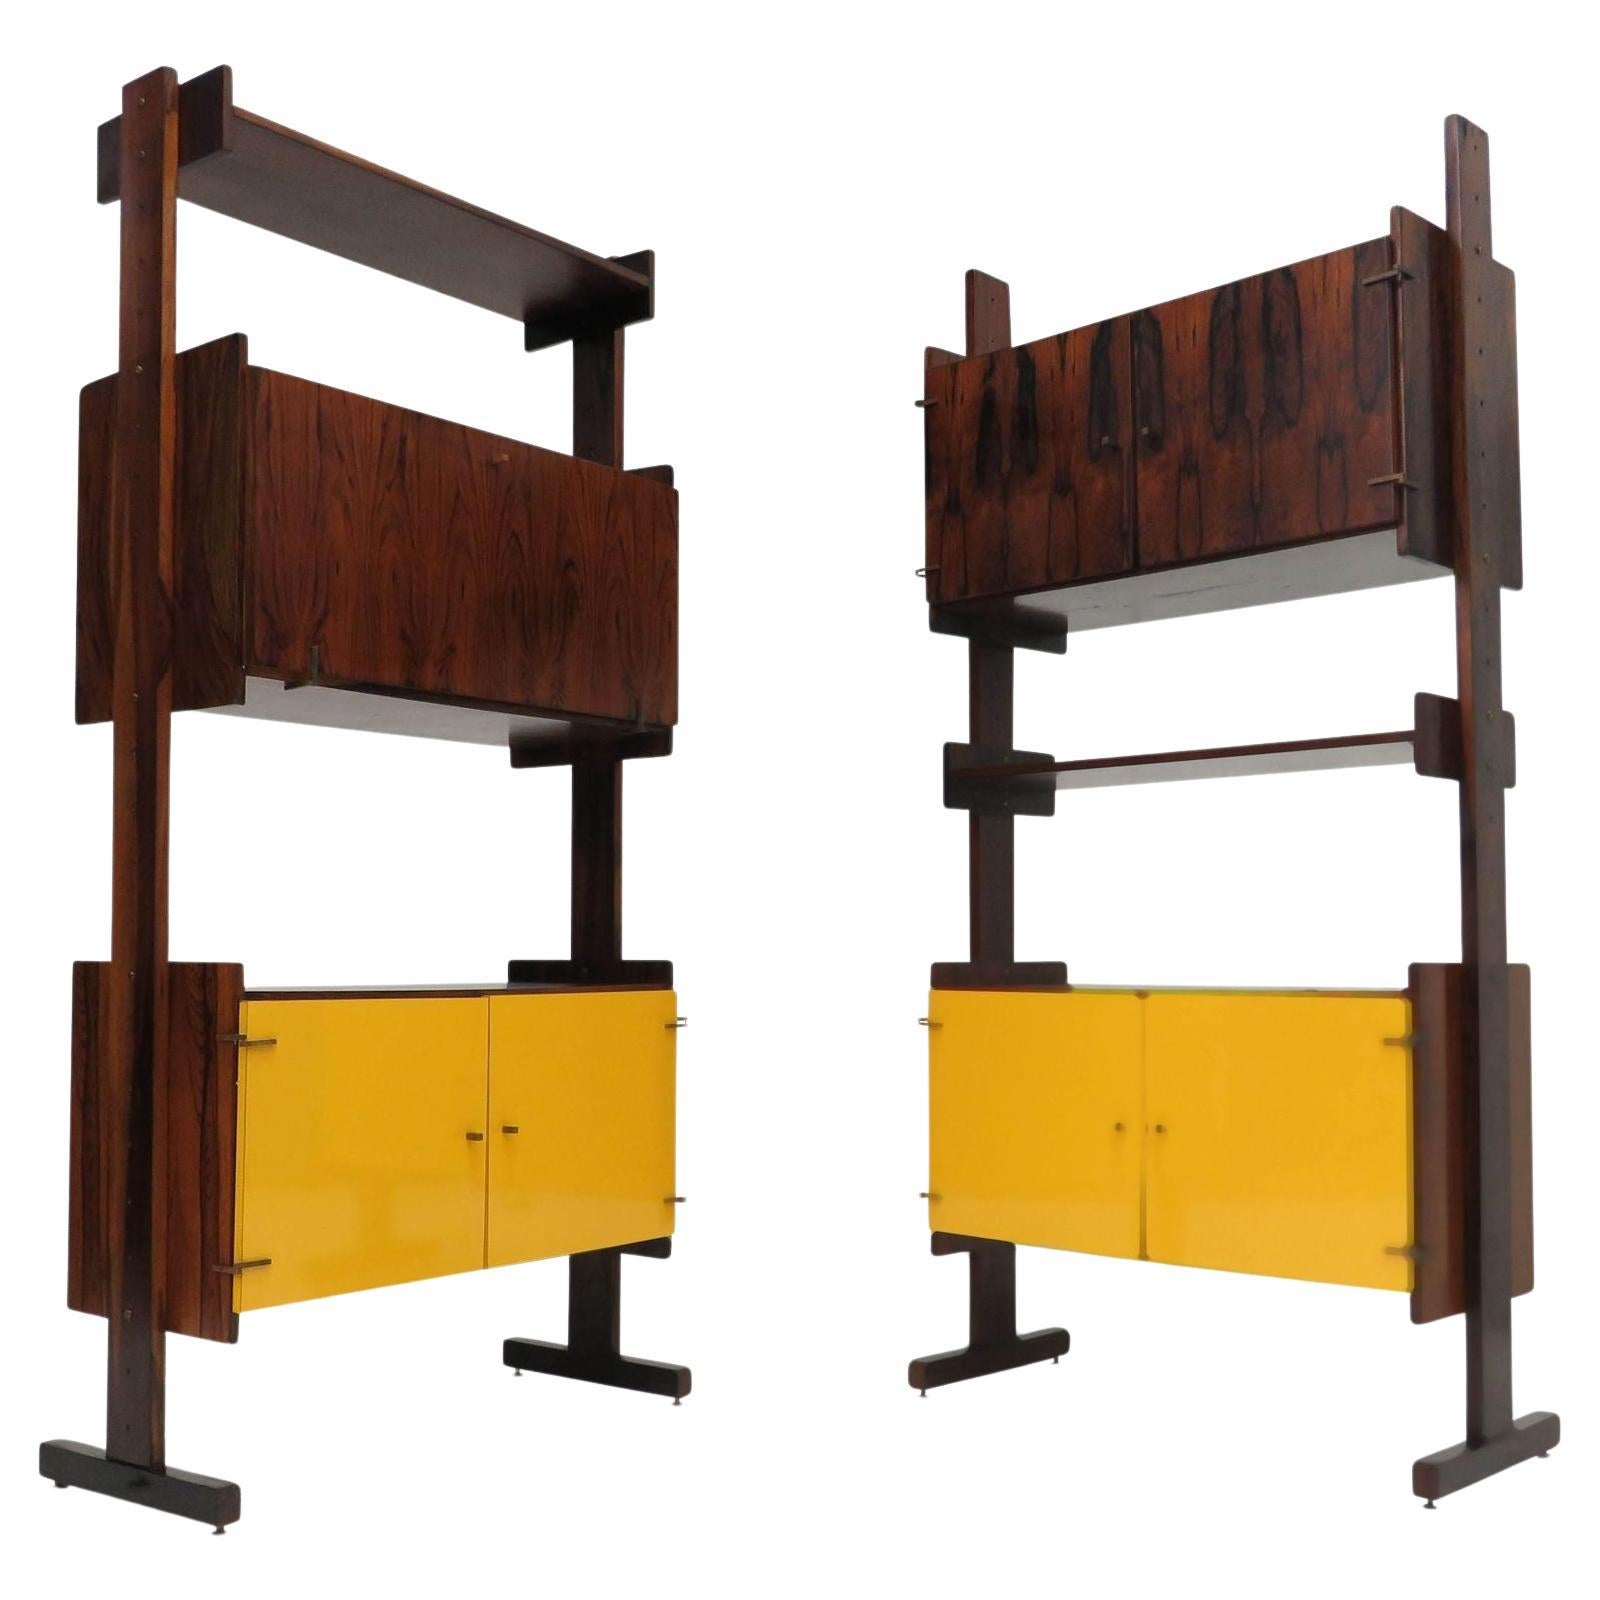 Brazil Rosewood Room Divider Bookcase or Wall Unit in Yellow For Sale